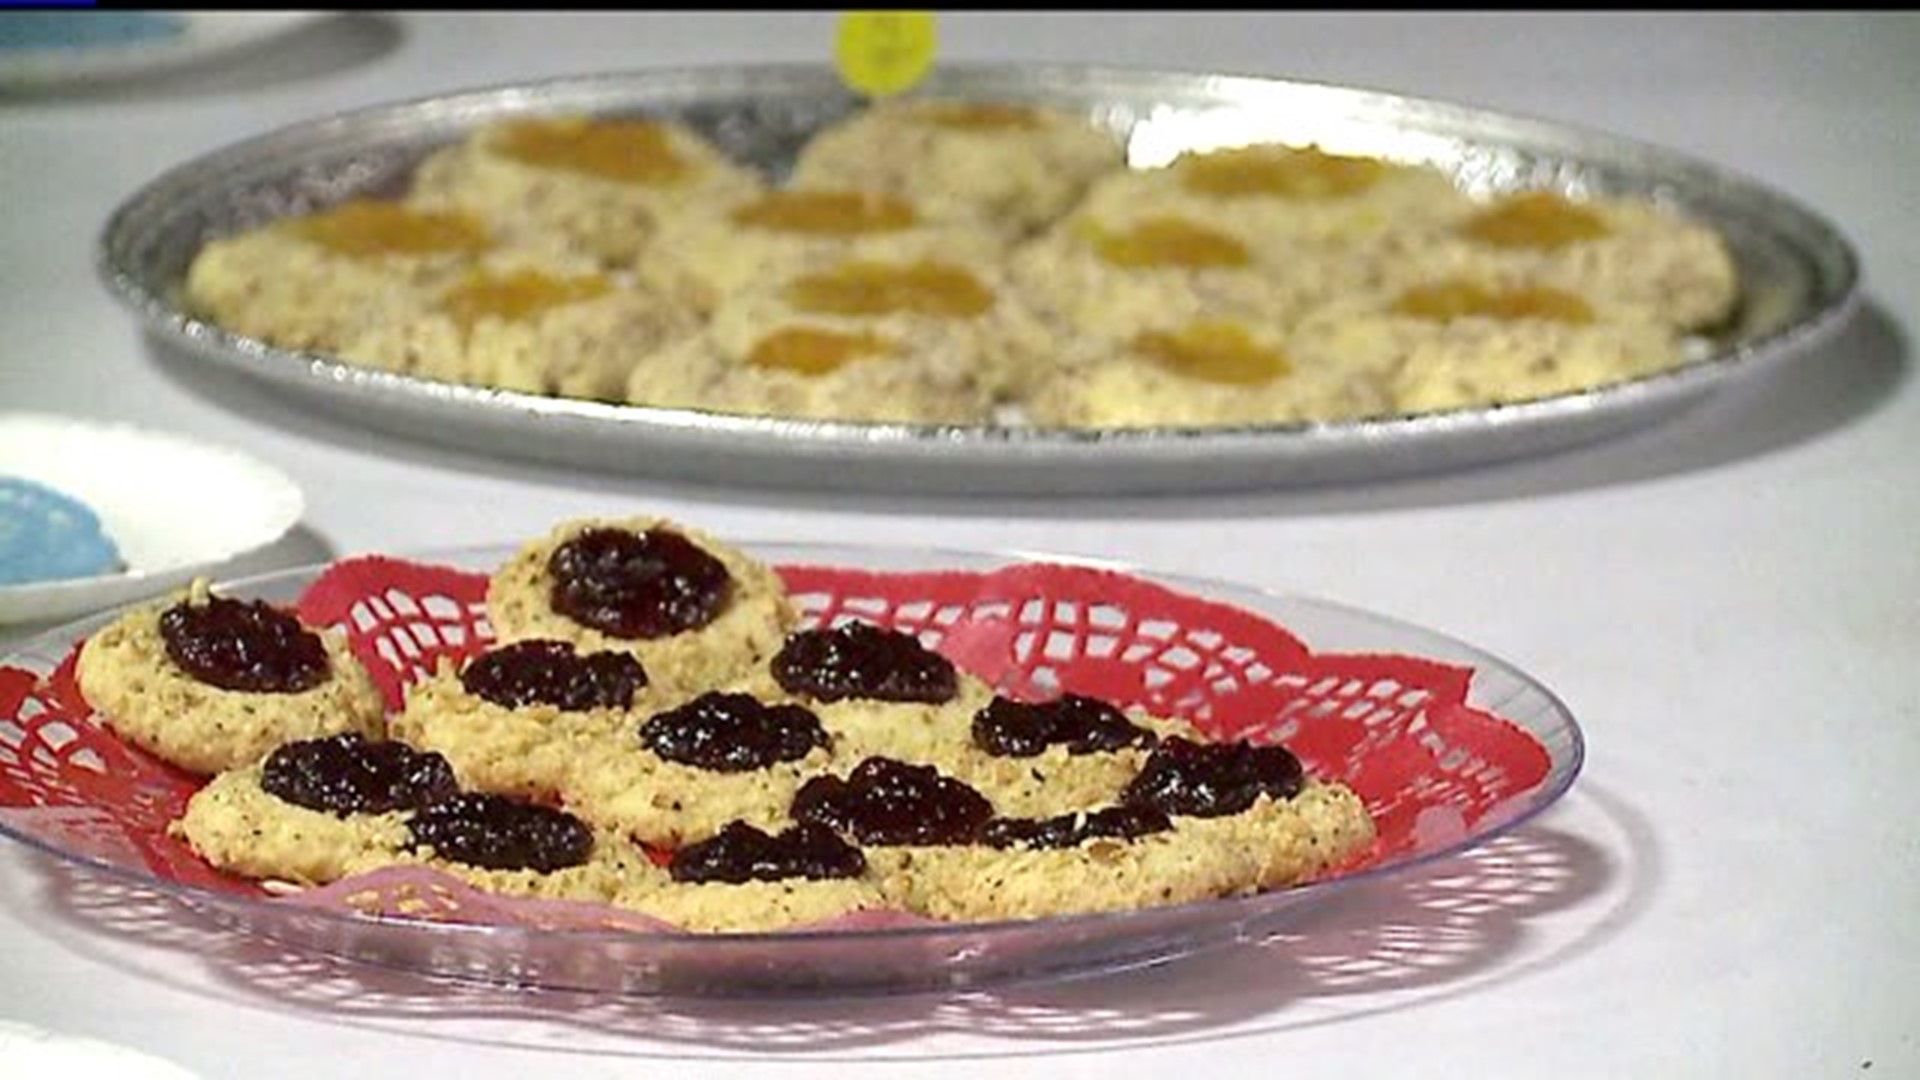 Bakers compete in Thumbprint Cookie competition